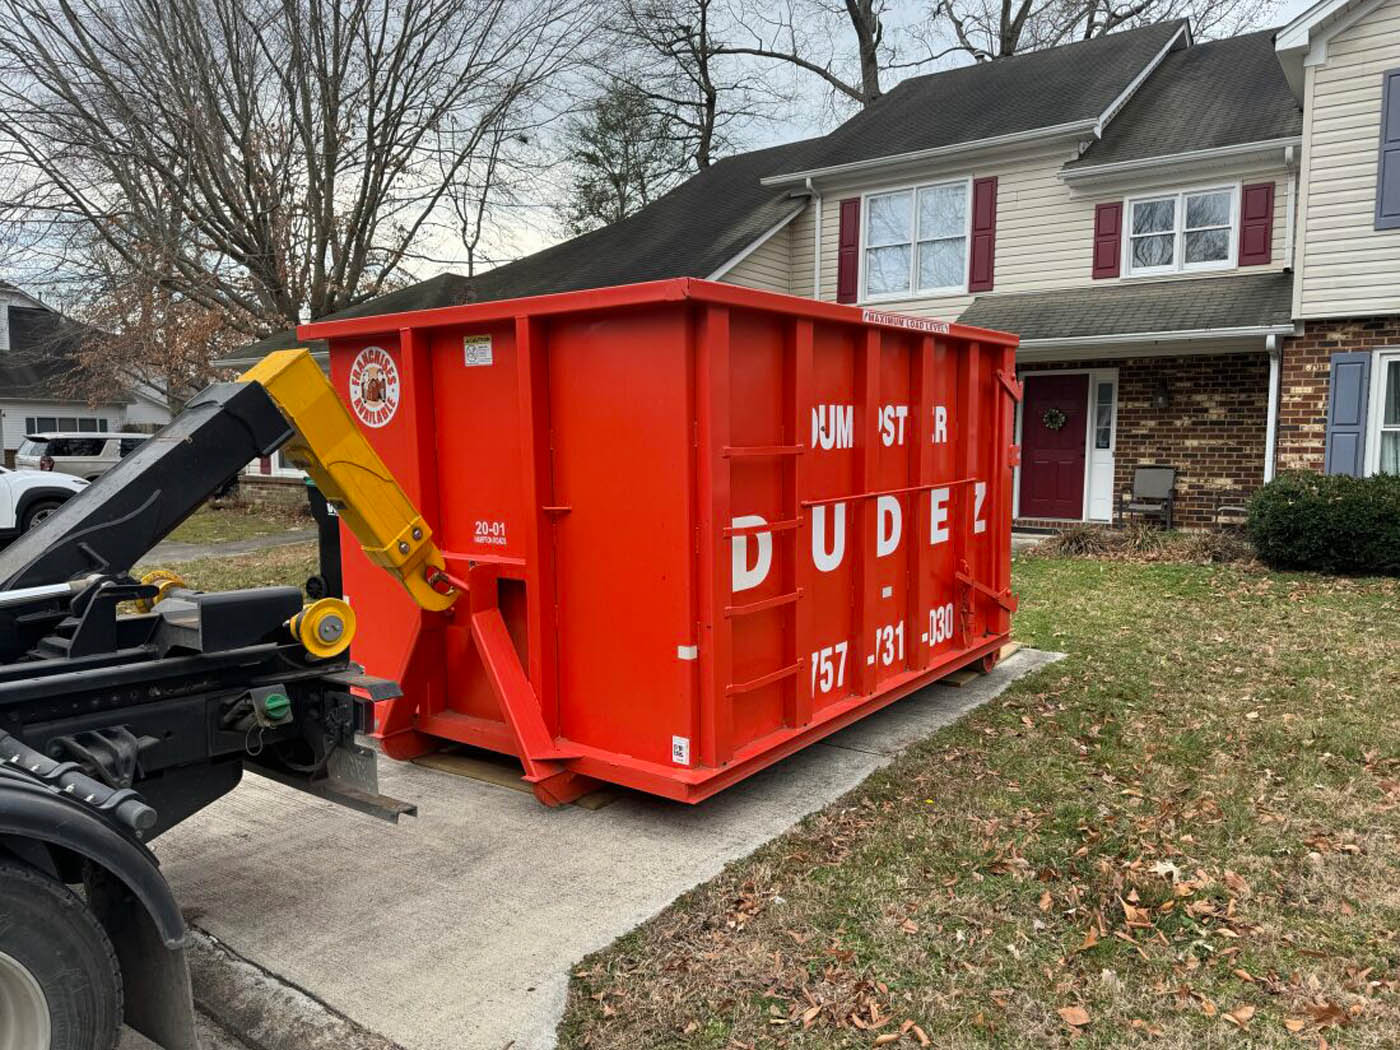 A Dumpster Dudez dumpster ready to meet the waste management needs of a homeowner.